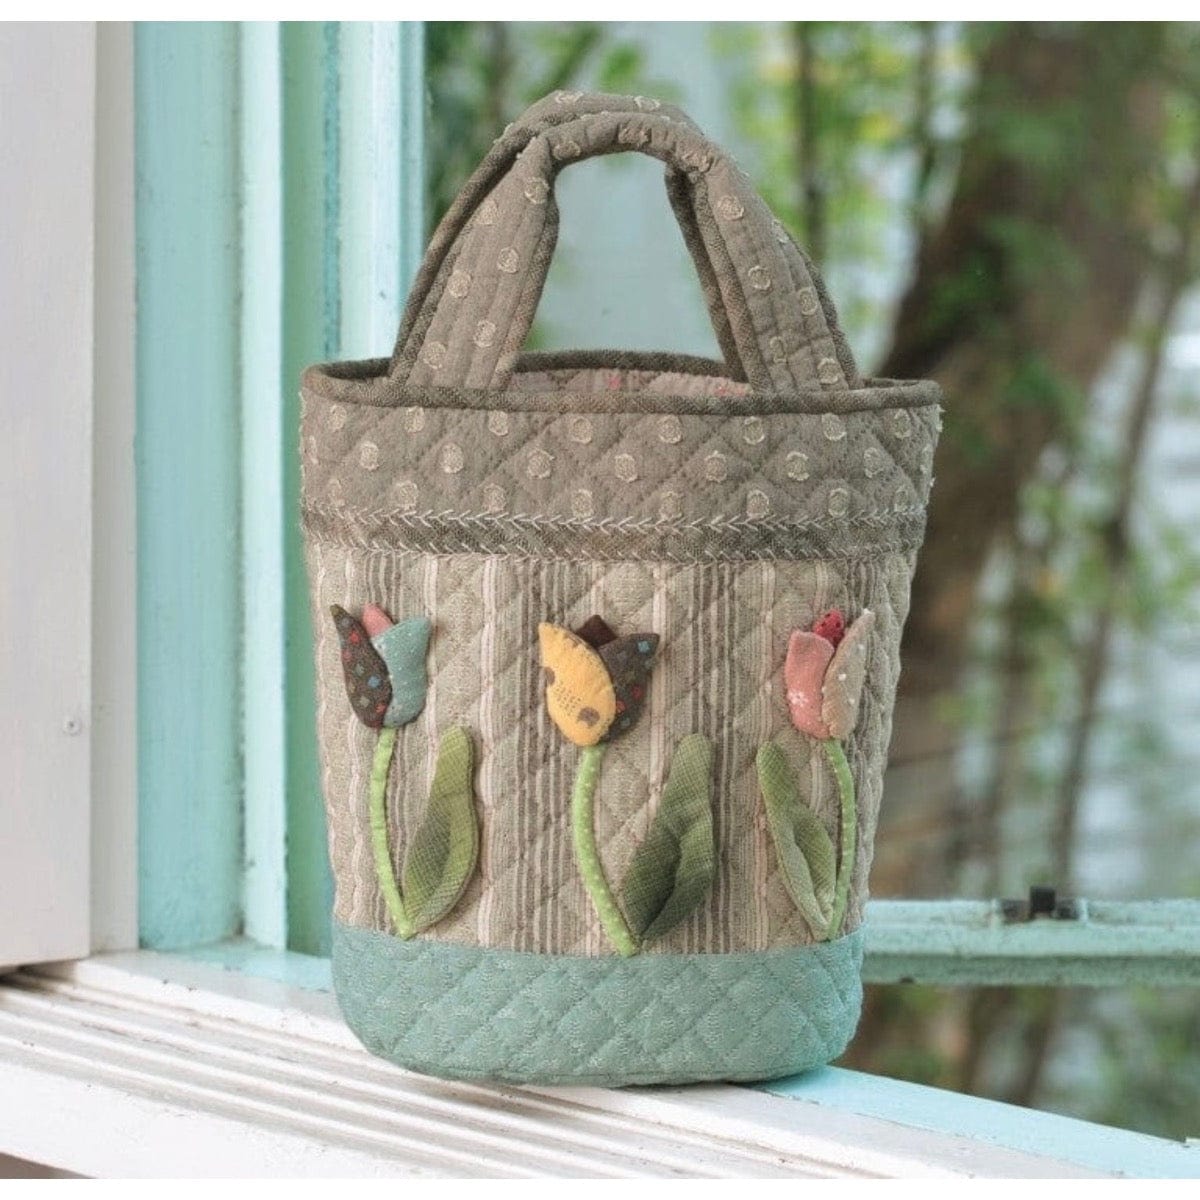 Quilted Bags & Gifts: 36 Classic Quilting Projects by Akemi Shibata